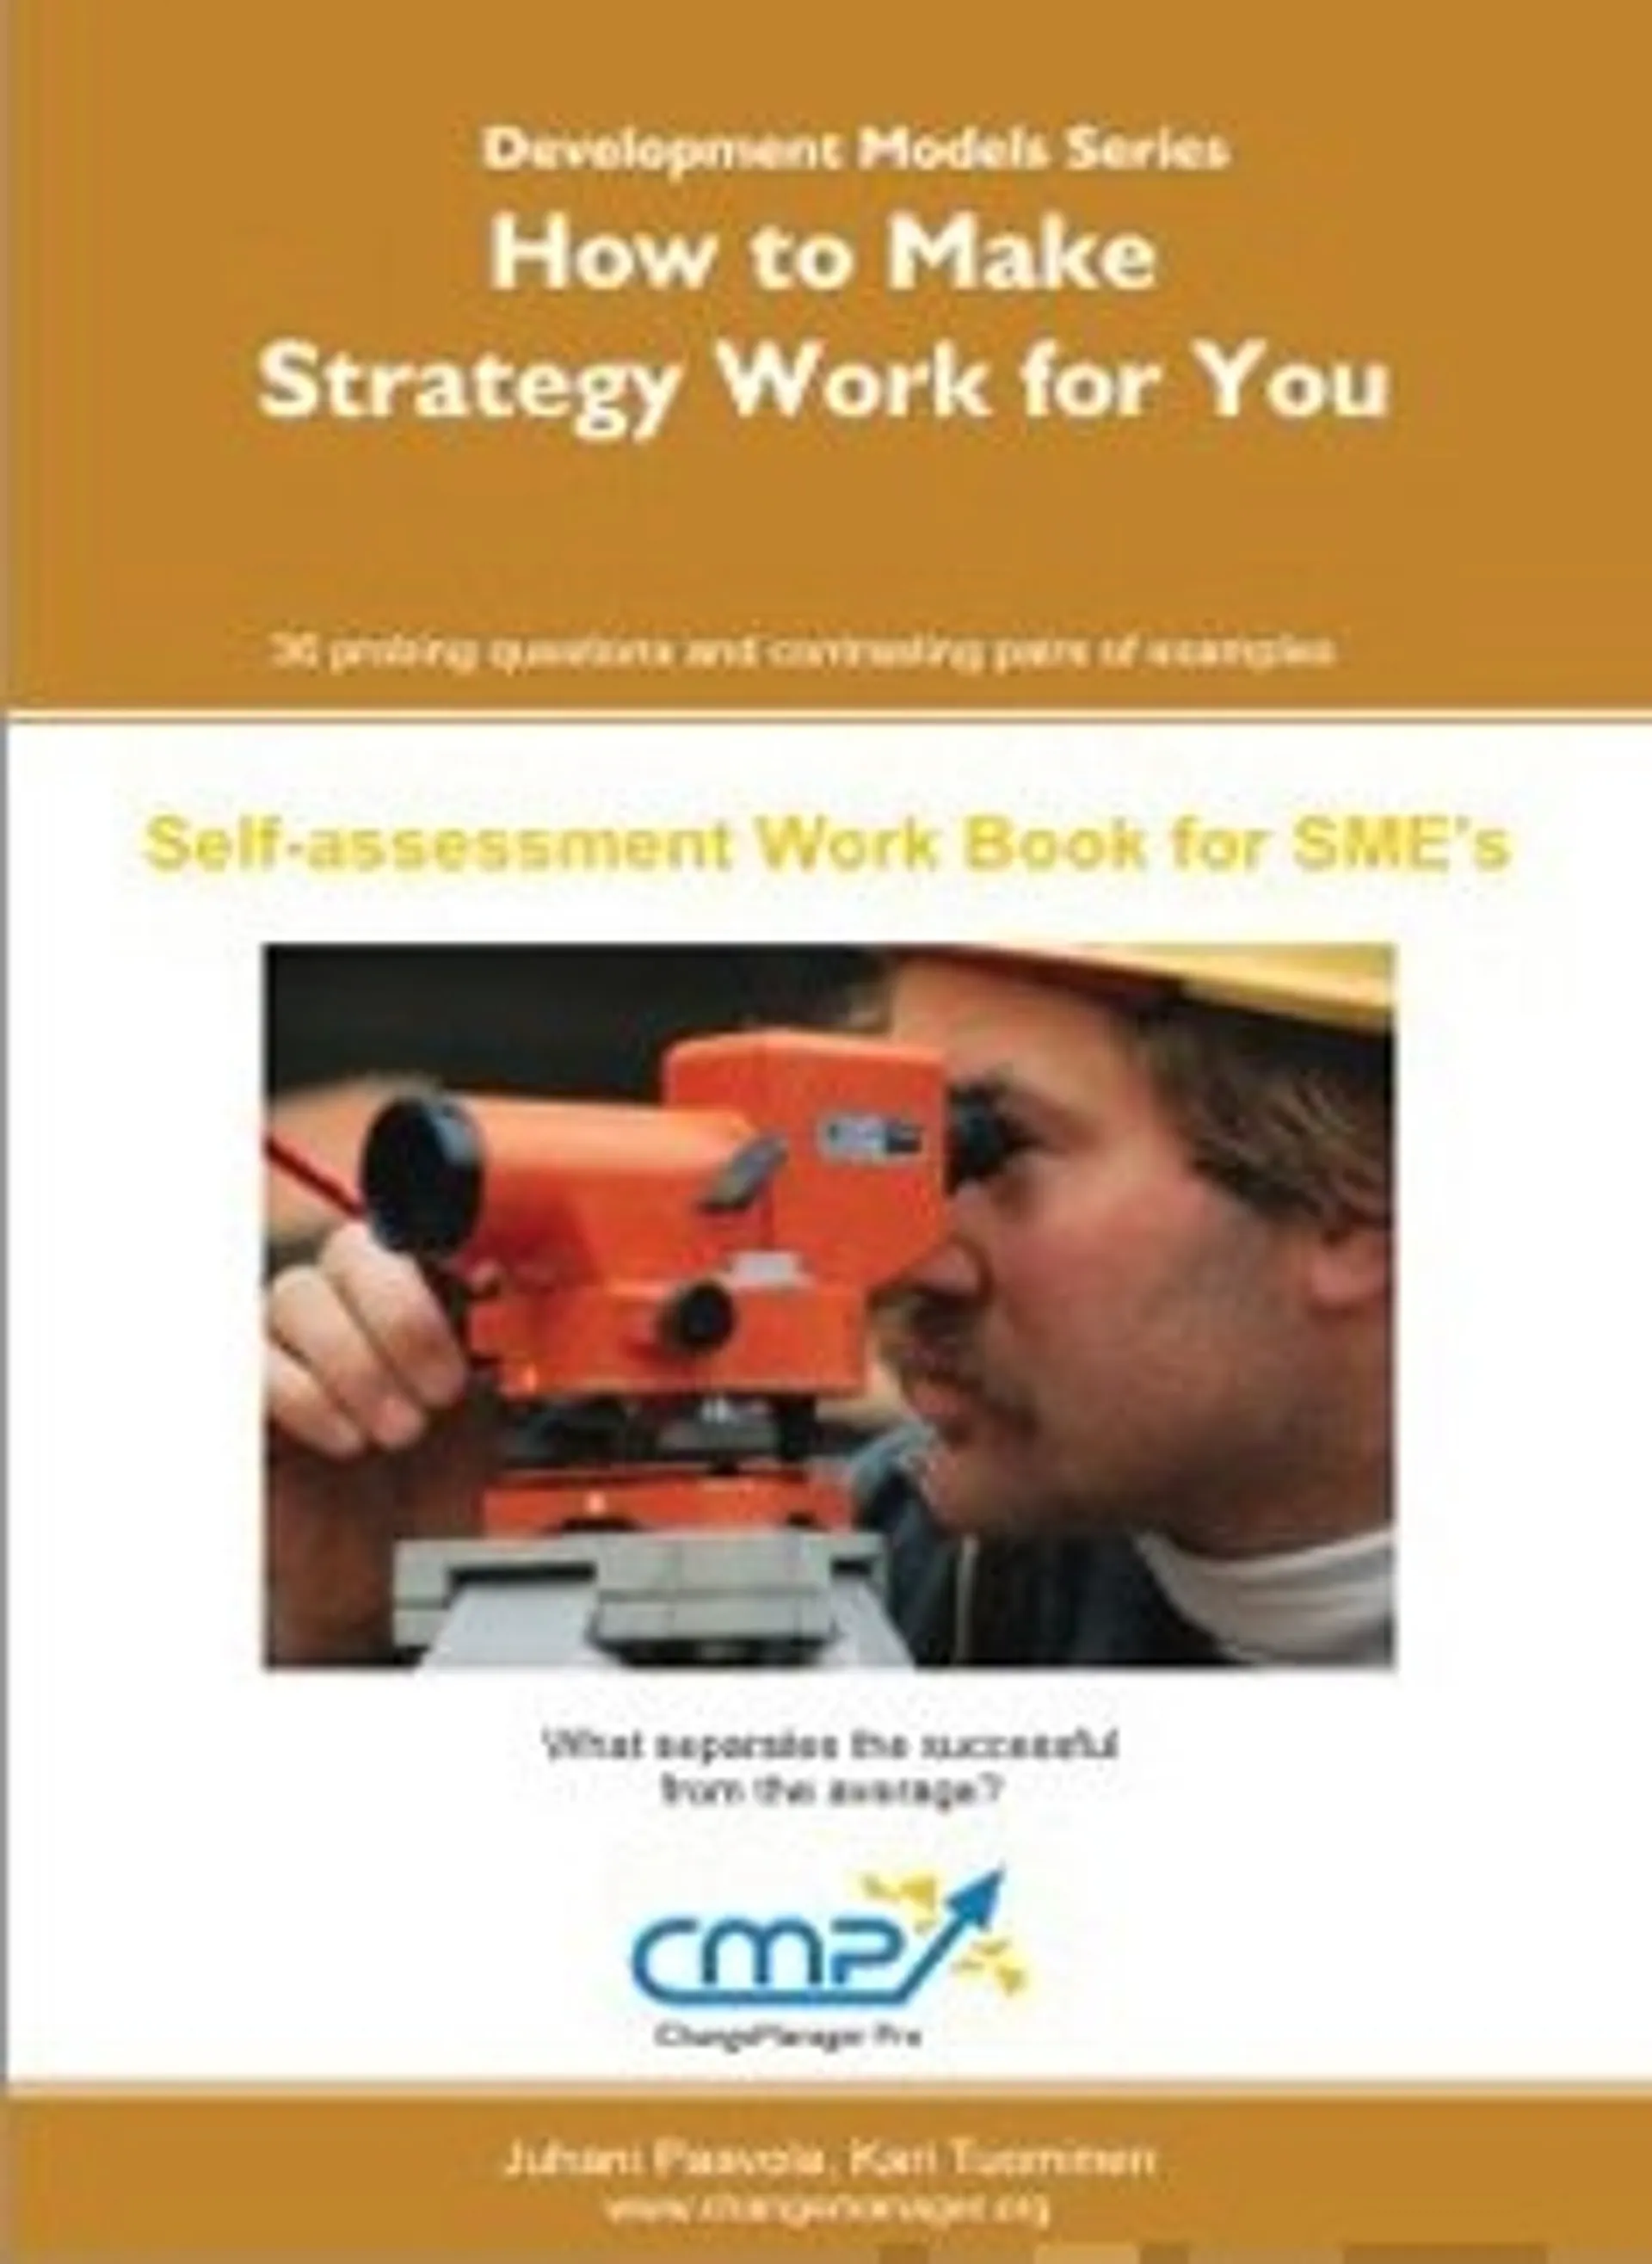 How to Make Strategy Work for You - EFQM 2010